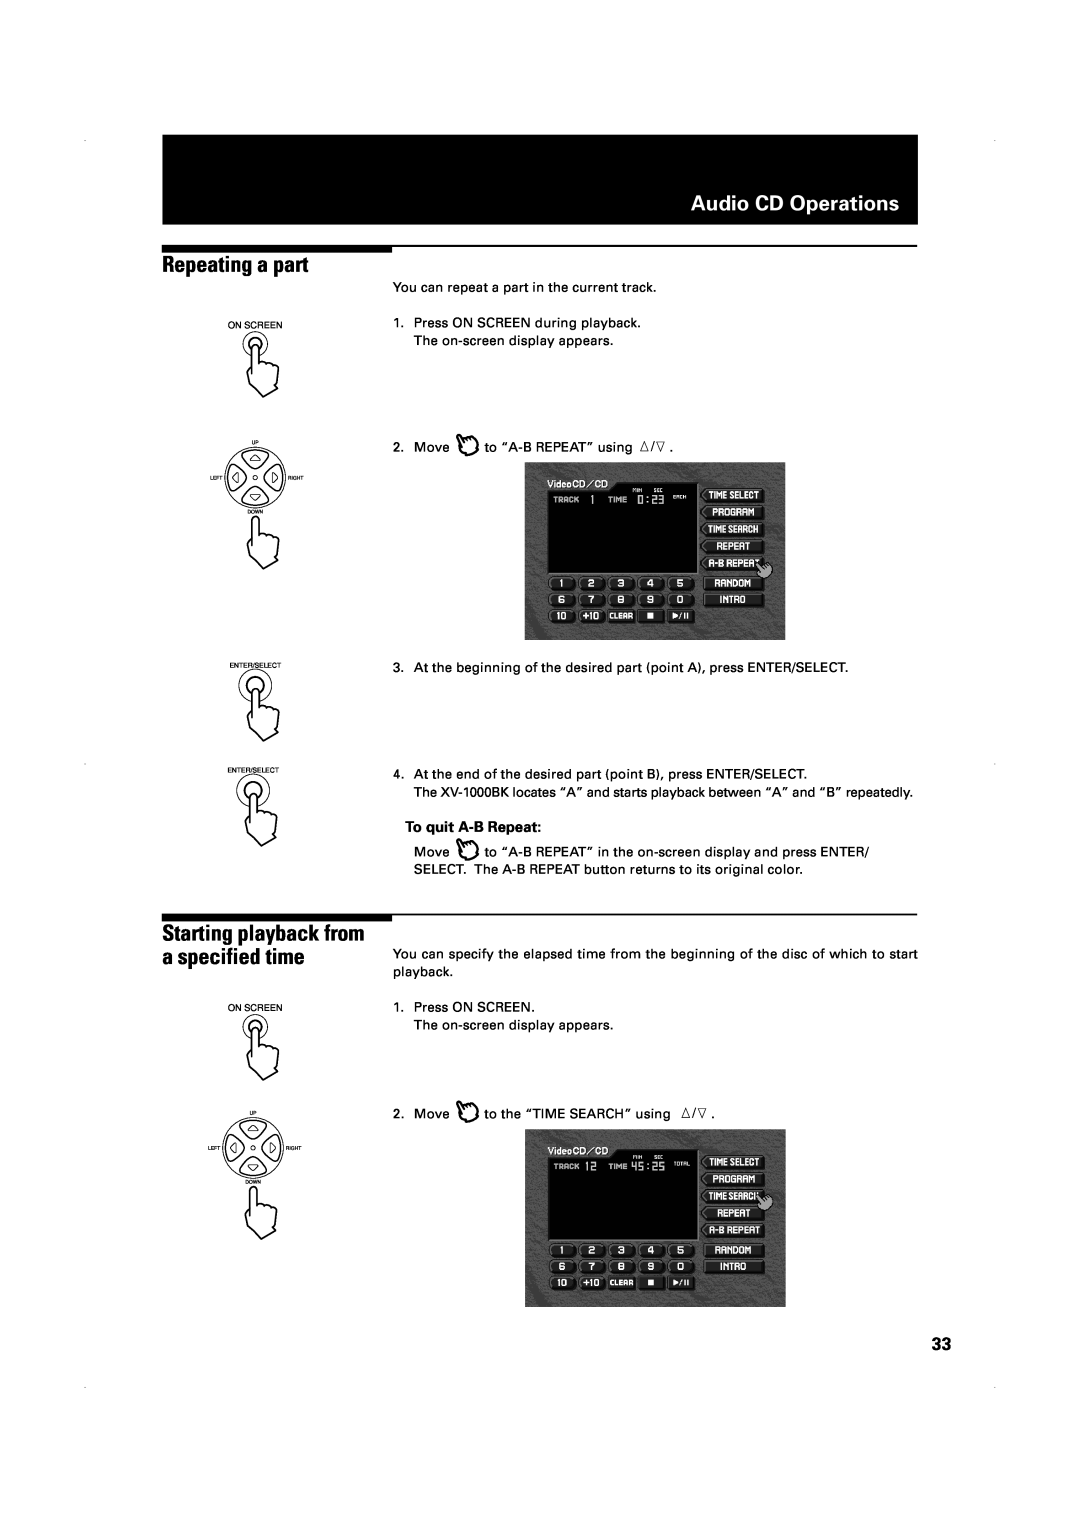 JVC XV-1000BK manual Starting playback from a specified time, Repeating a part, Audio CD Operations 